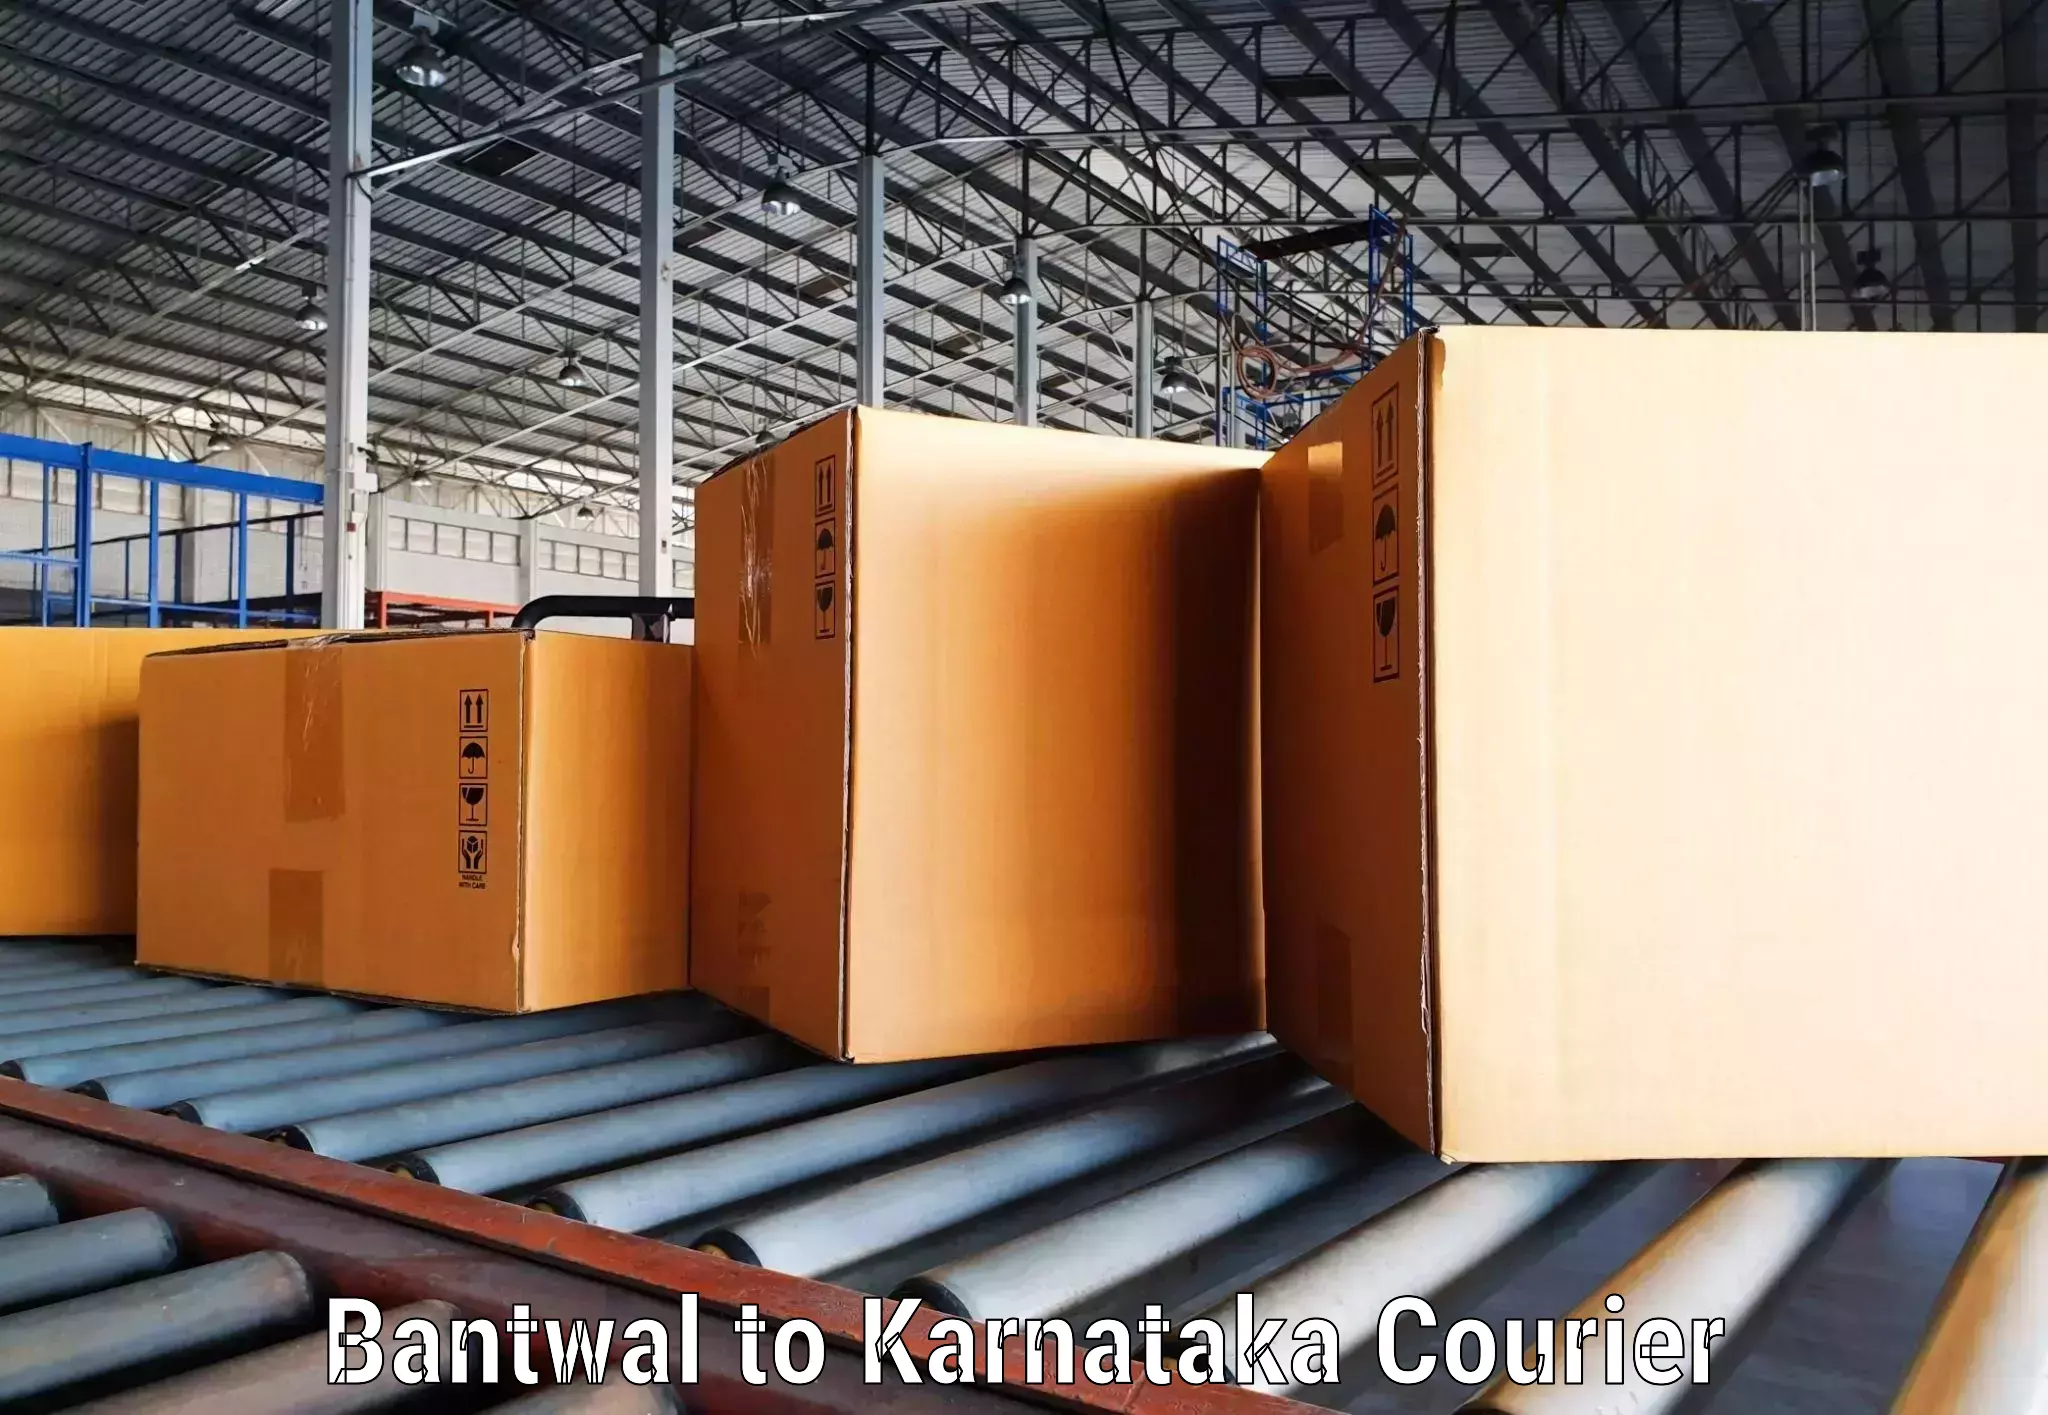 Professional courier handling Bantwal to Mysore University